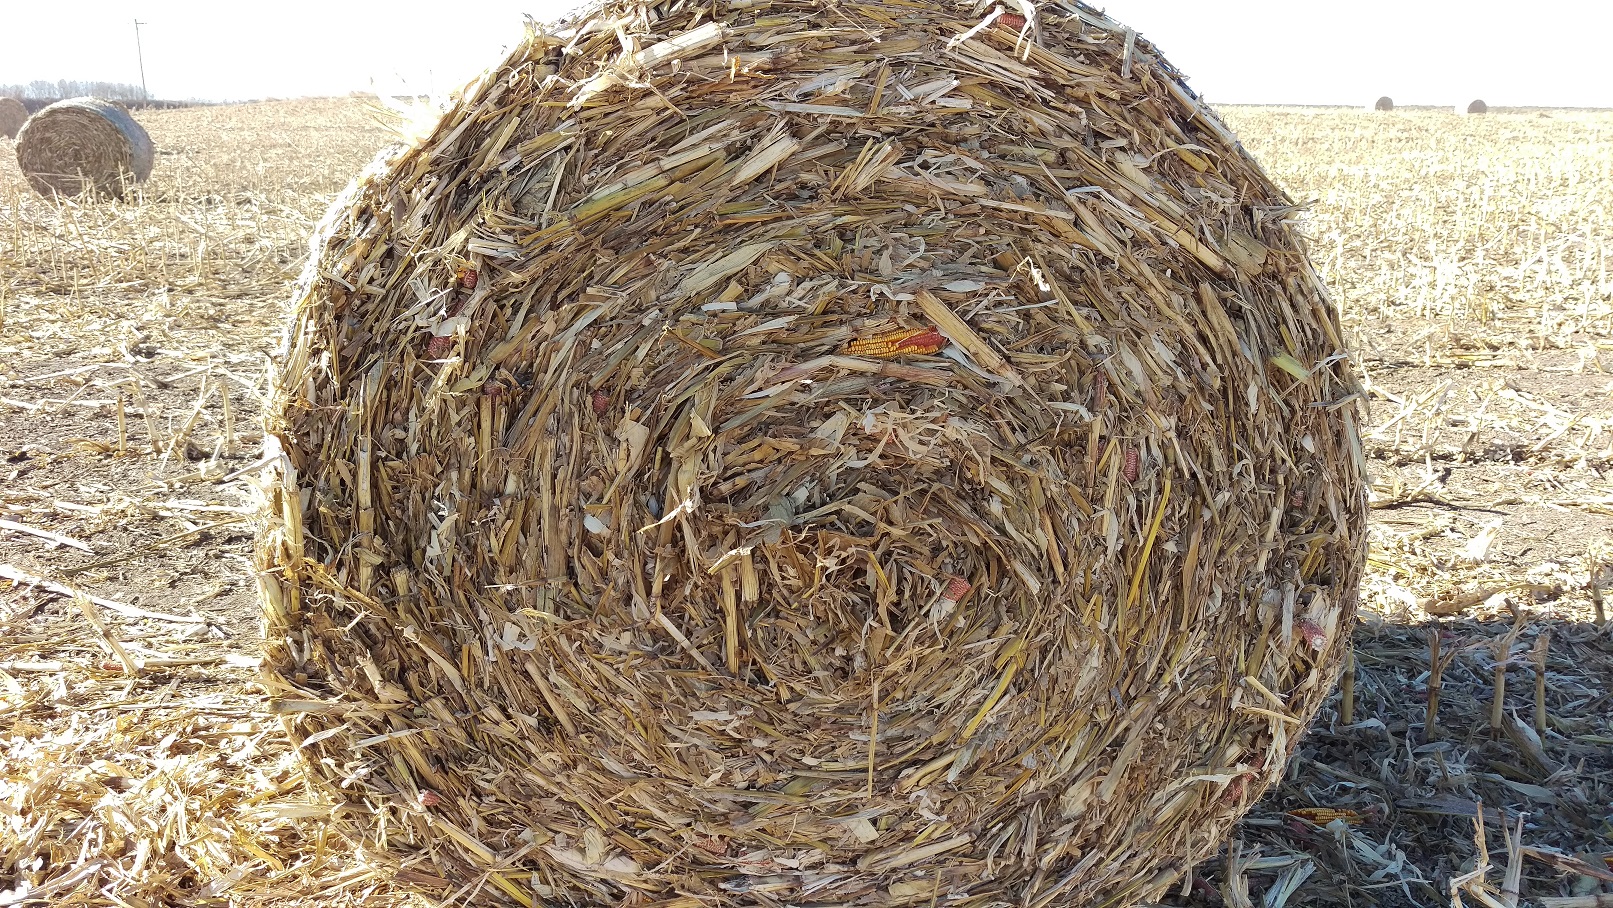 Baling of cornstalk residue comes with many questions.  Photo courtesy of Jenny Rees.